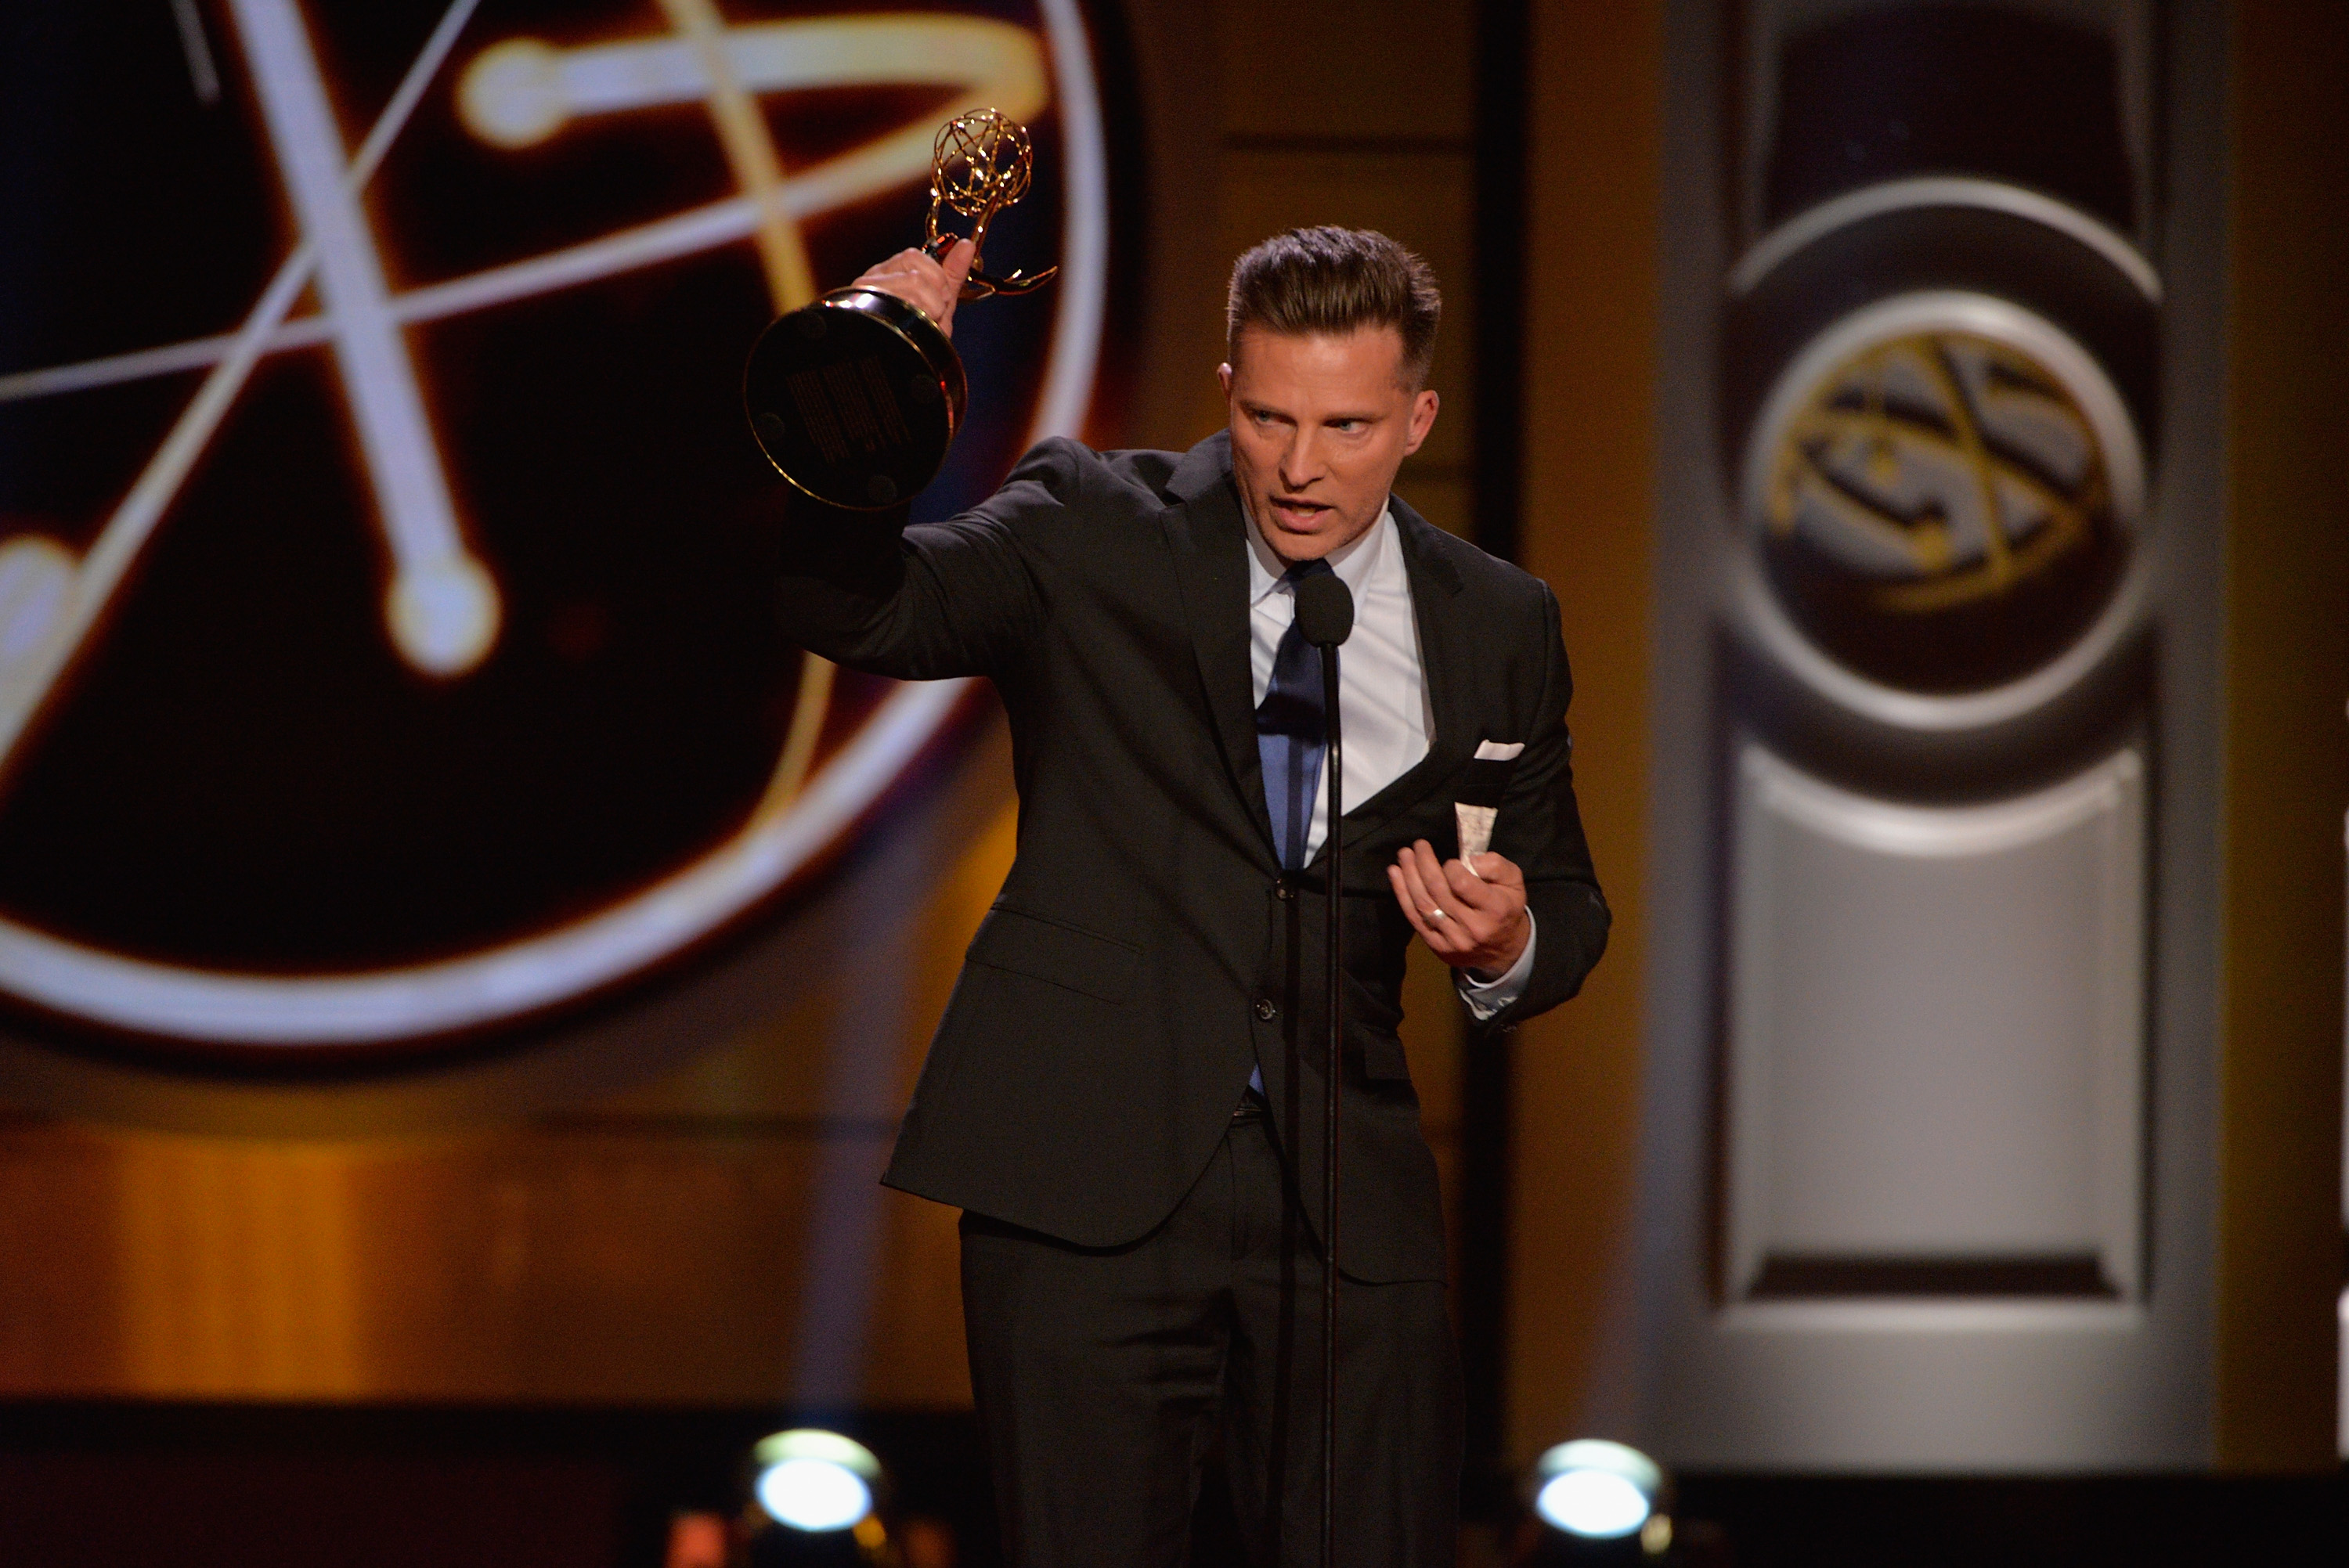 'The Young and the Restless' actor Steve Burton wearing a black suit and holding a Daytime Emmy Award.